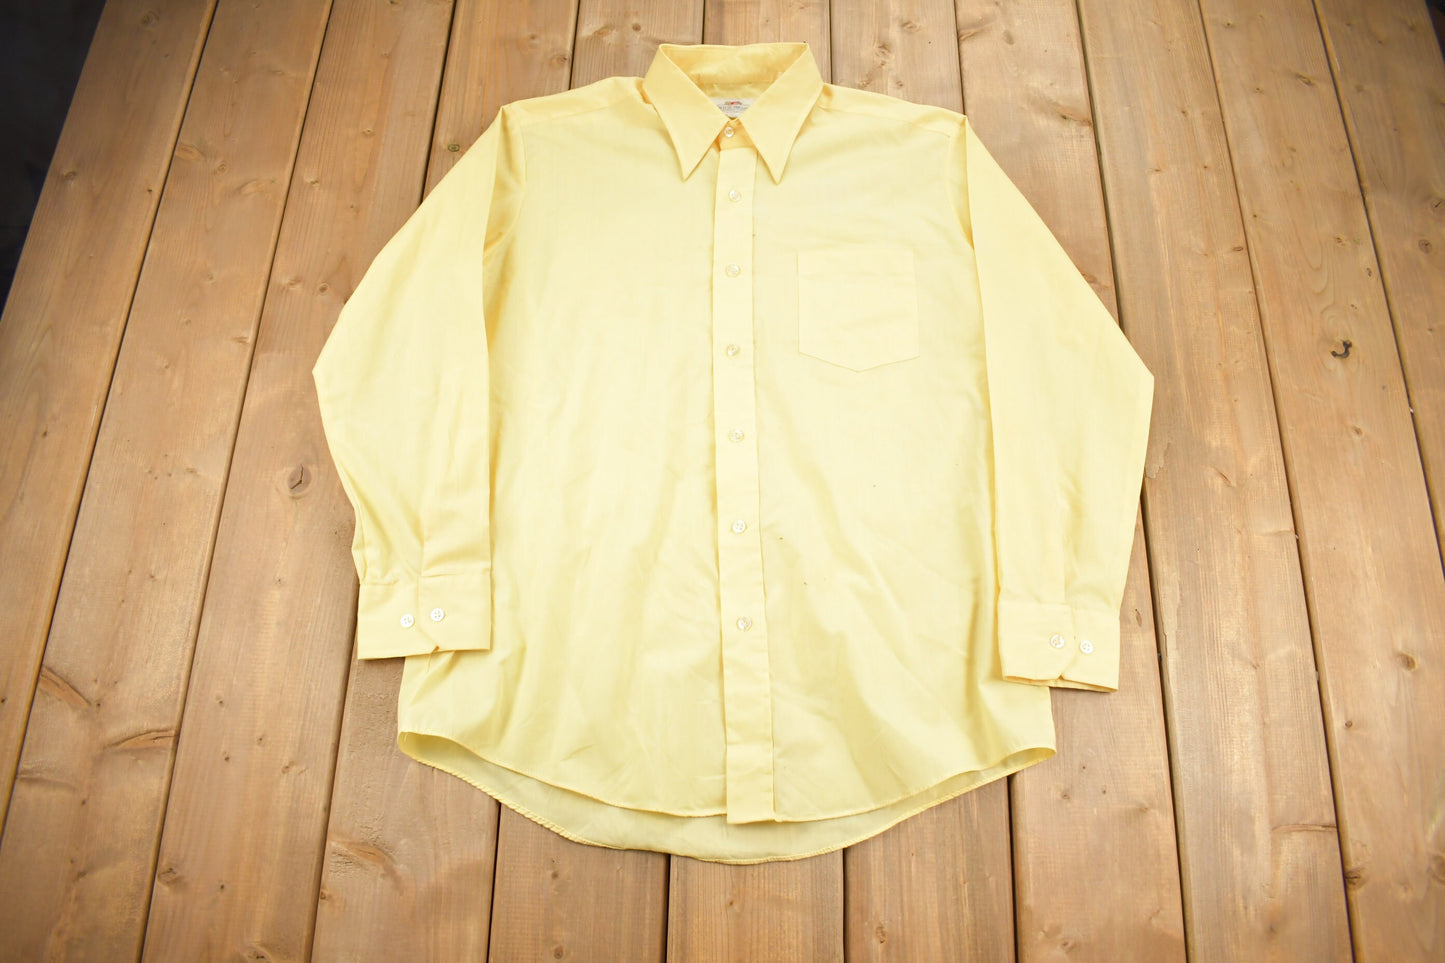 Vintage 1990s Blank Yellow Fruit Of The Loom Button Up Shirt / 1990s Button Up / Basic Button Up / Blank Button Up / Vintage Dress Shirt